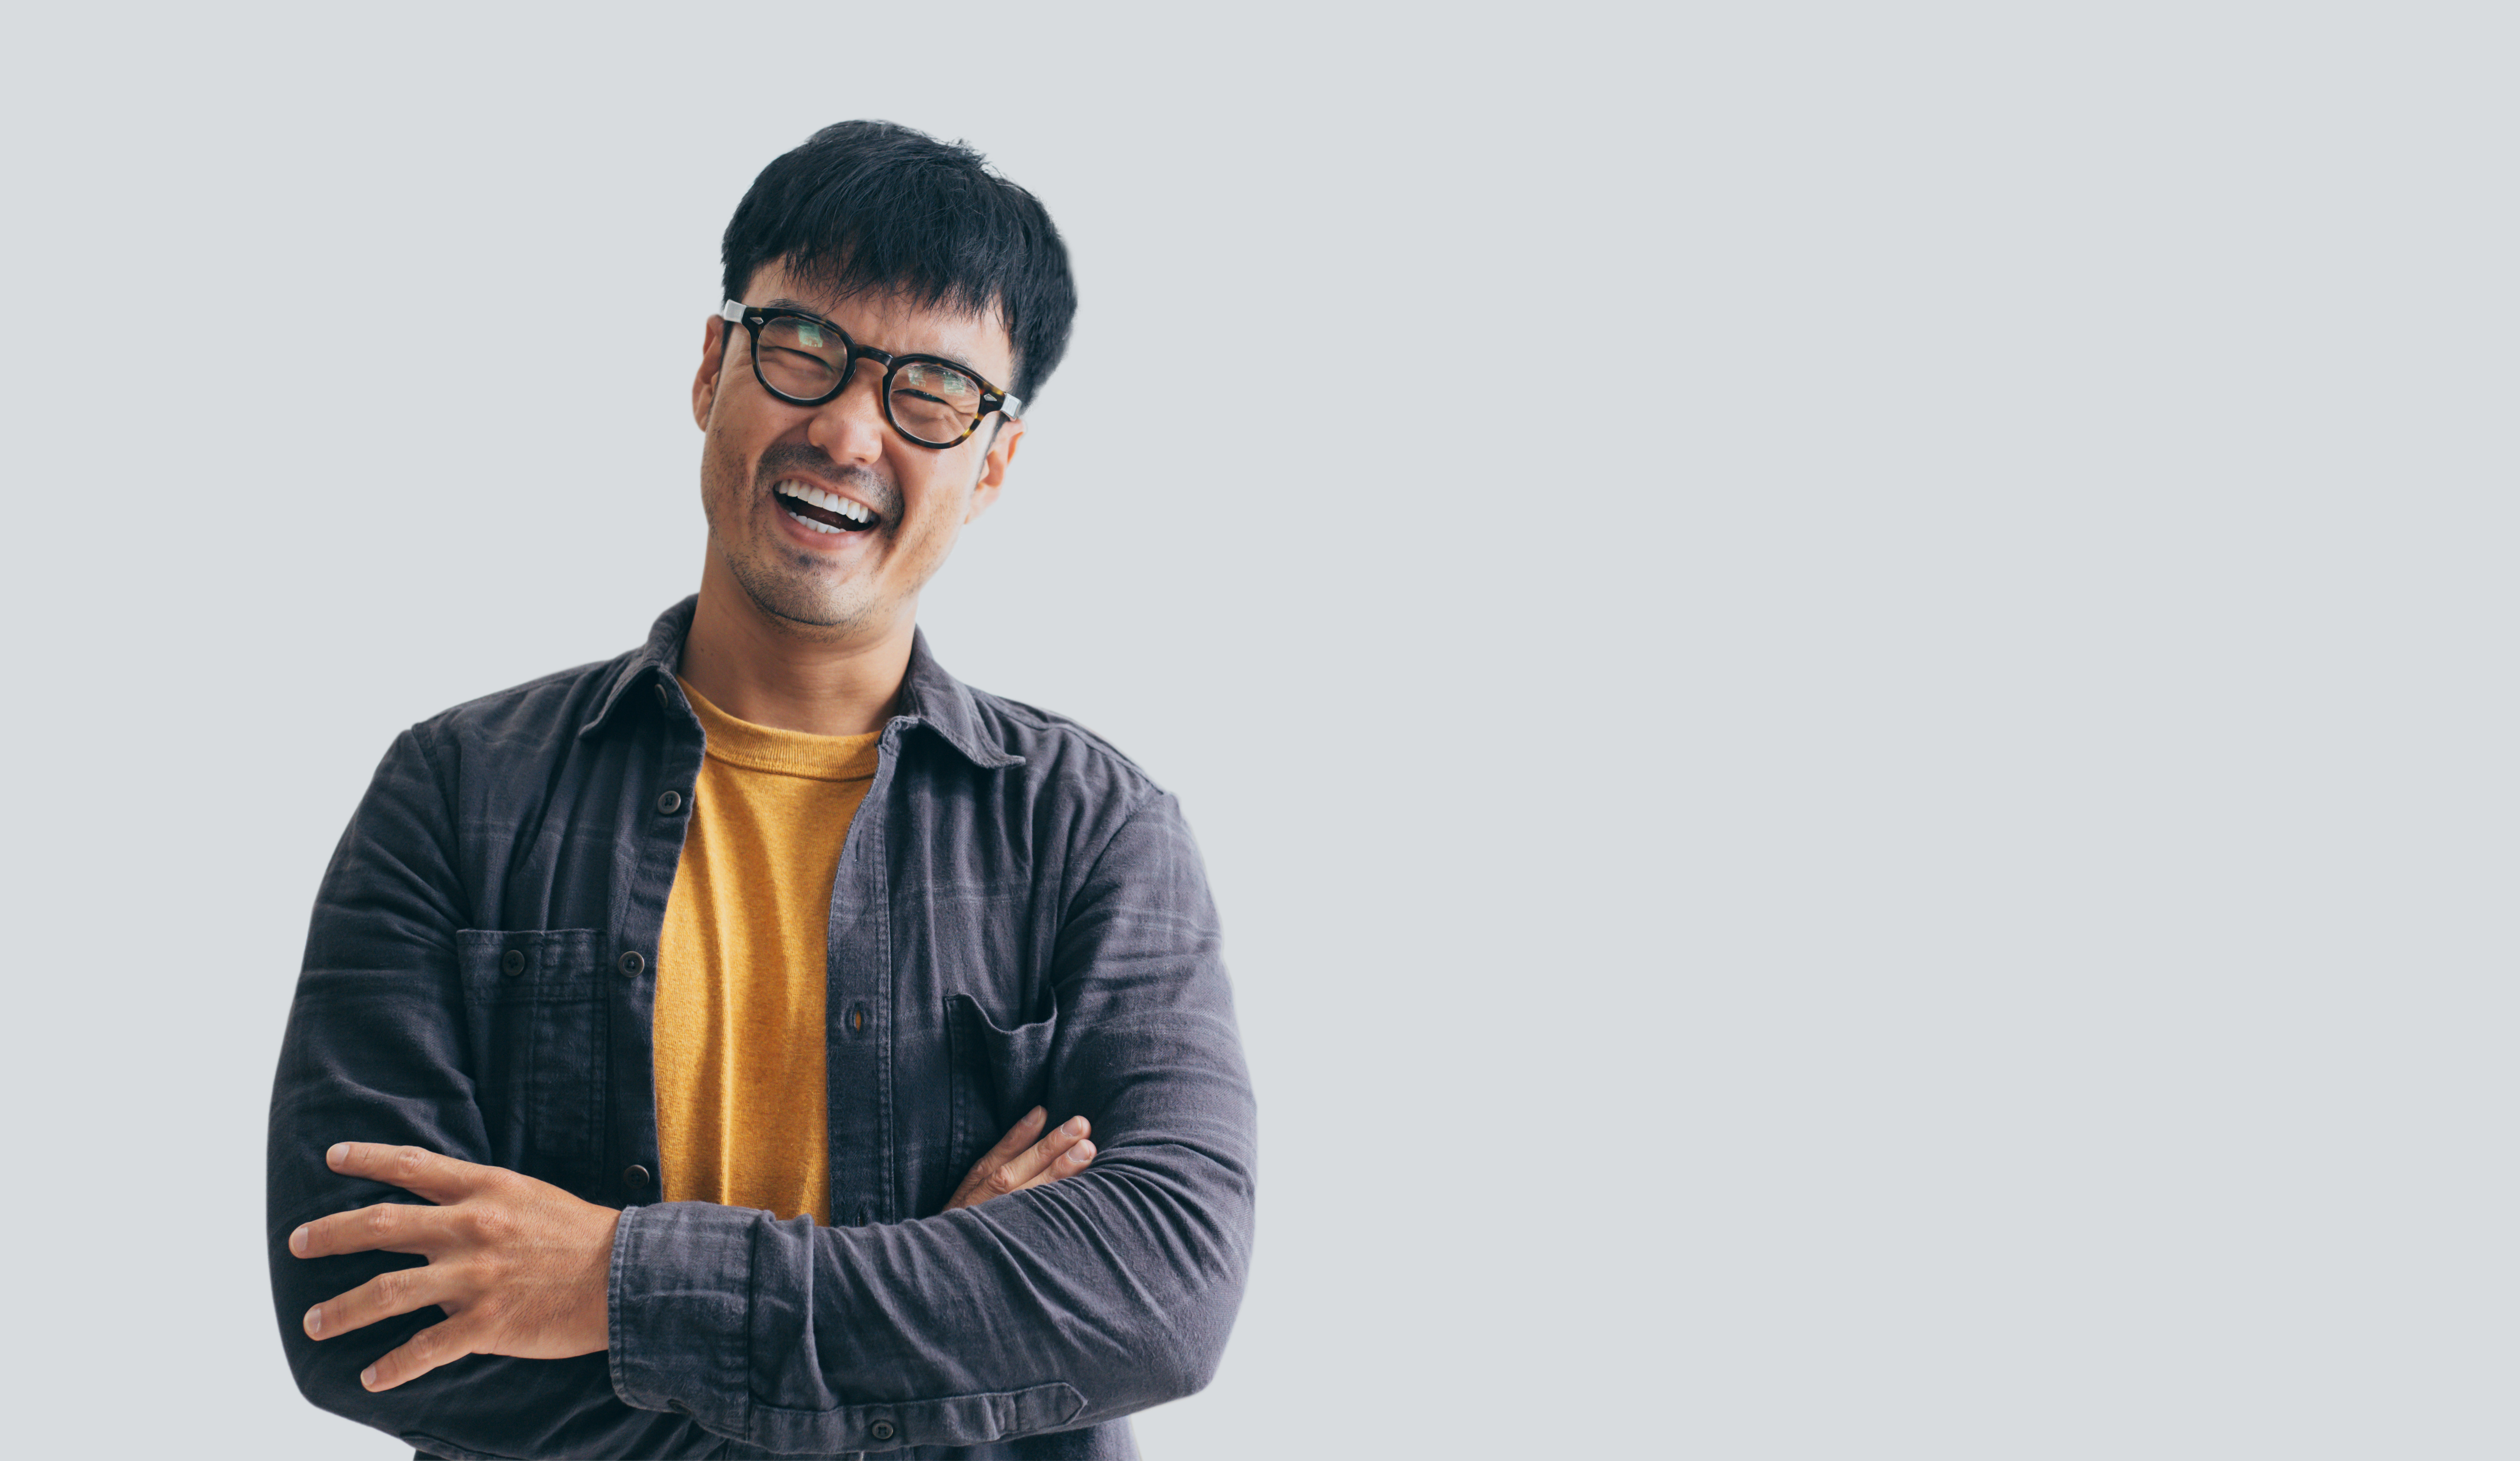 asian man portrait young male wear eye glasses smiling cheerful look thinking position with perfect clean skin posing on white background.fashion people life style concept